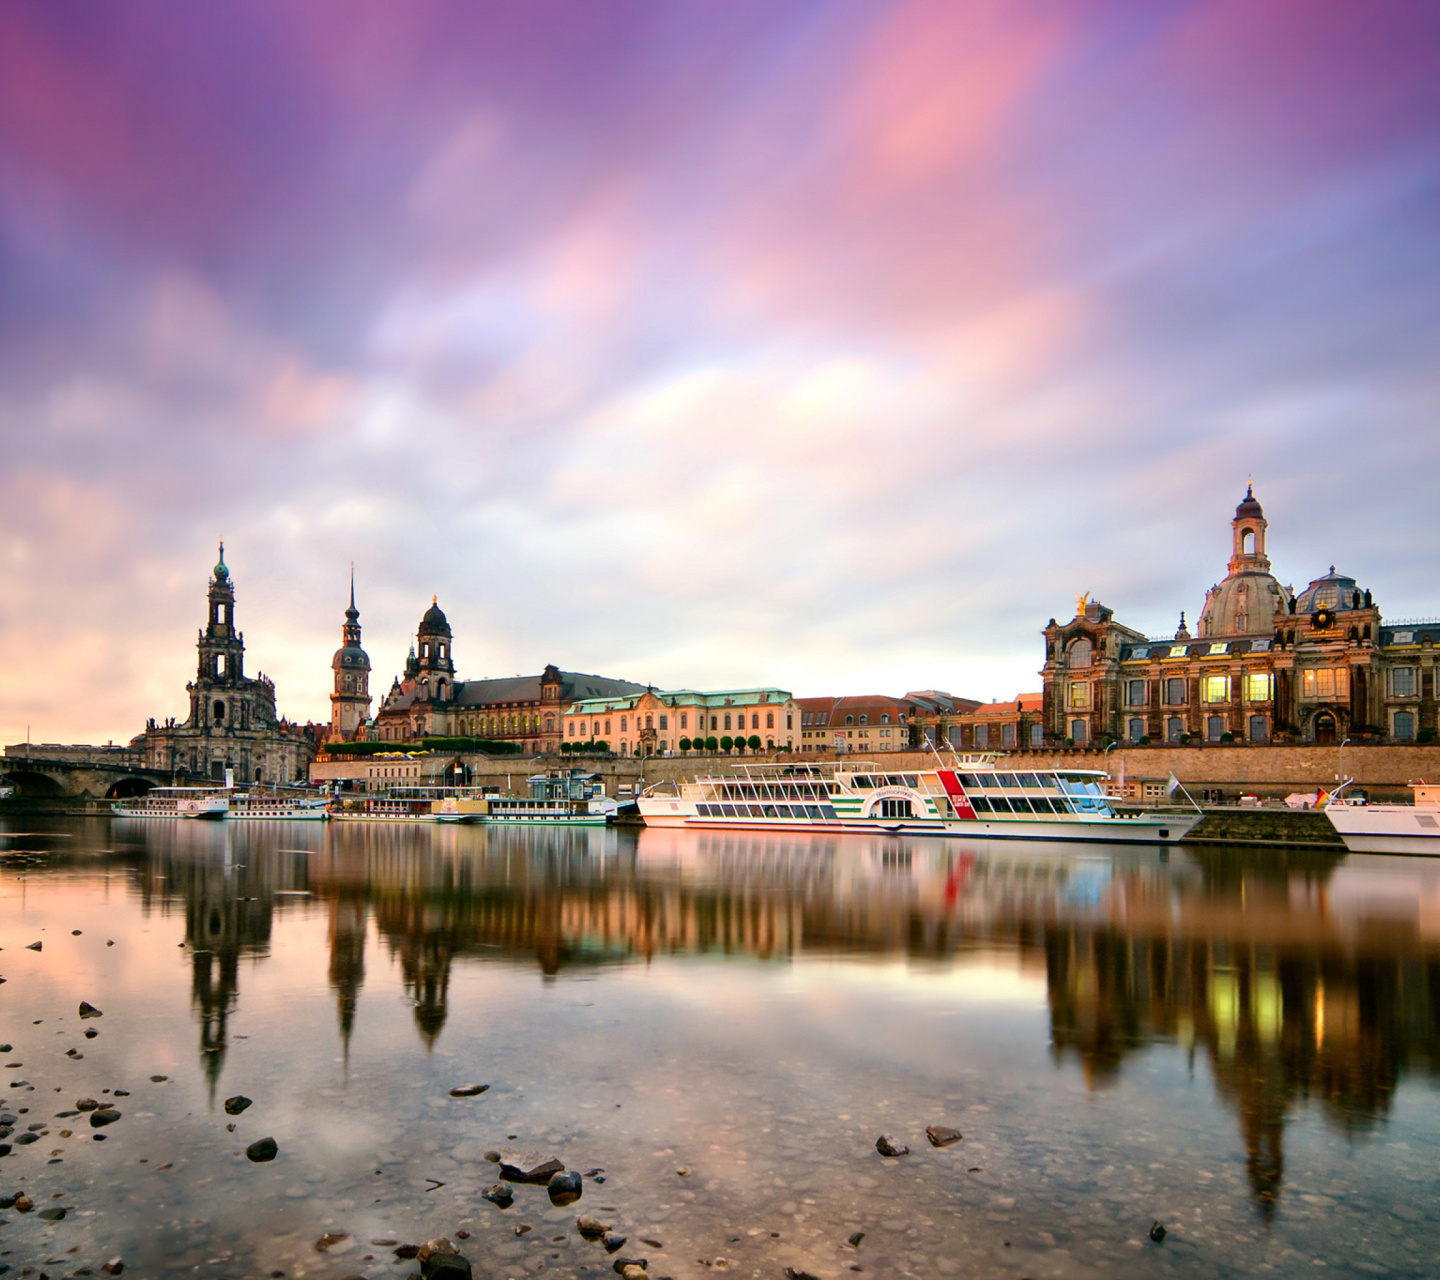 Dresden on Elbe River near Zwinger Palace wallpaper 1440x1280